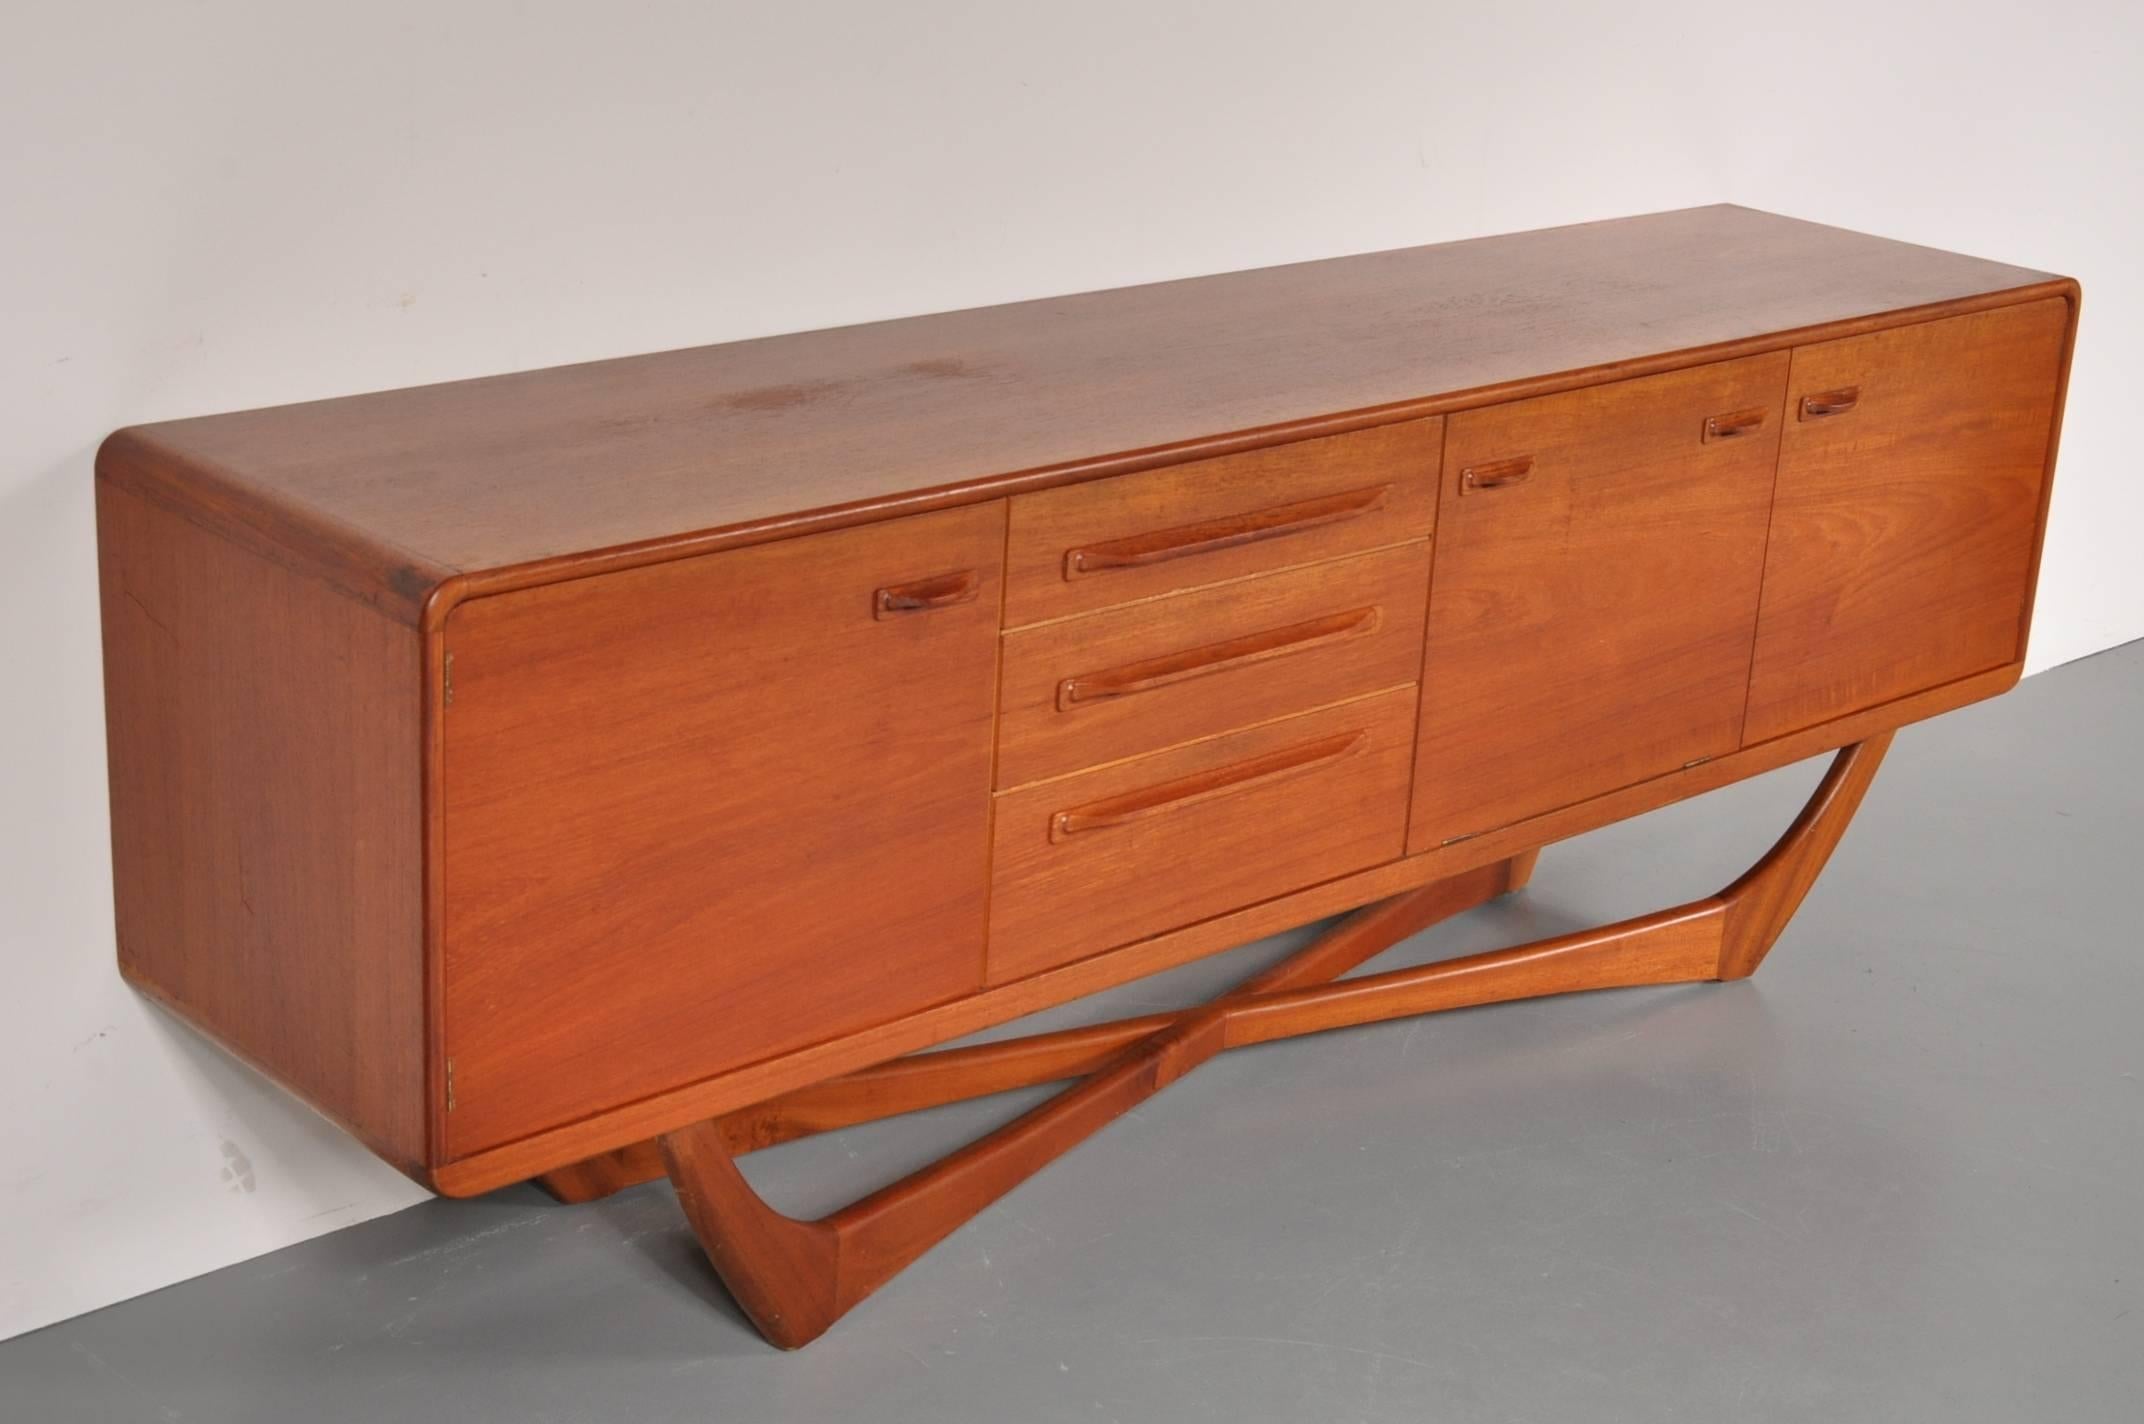 Eye-catching sideboard or credenza by Scottish manufacturer Beithcraft, made in the 1960s.

This piece has a wonderful organic shaped base, a unique finishing touch that makes this sideboard truly stand out and making it rare as well. It is made